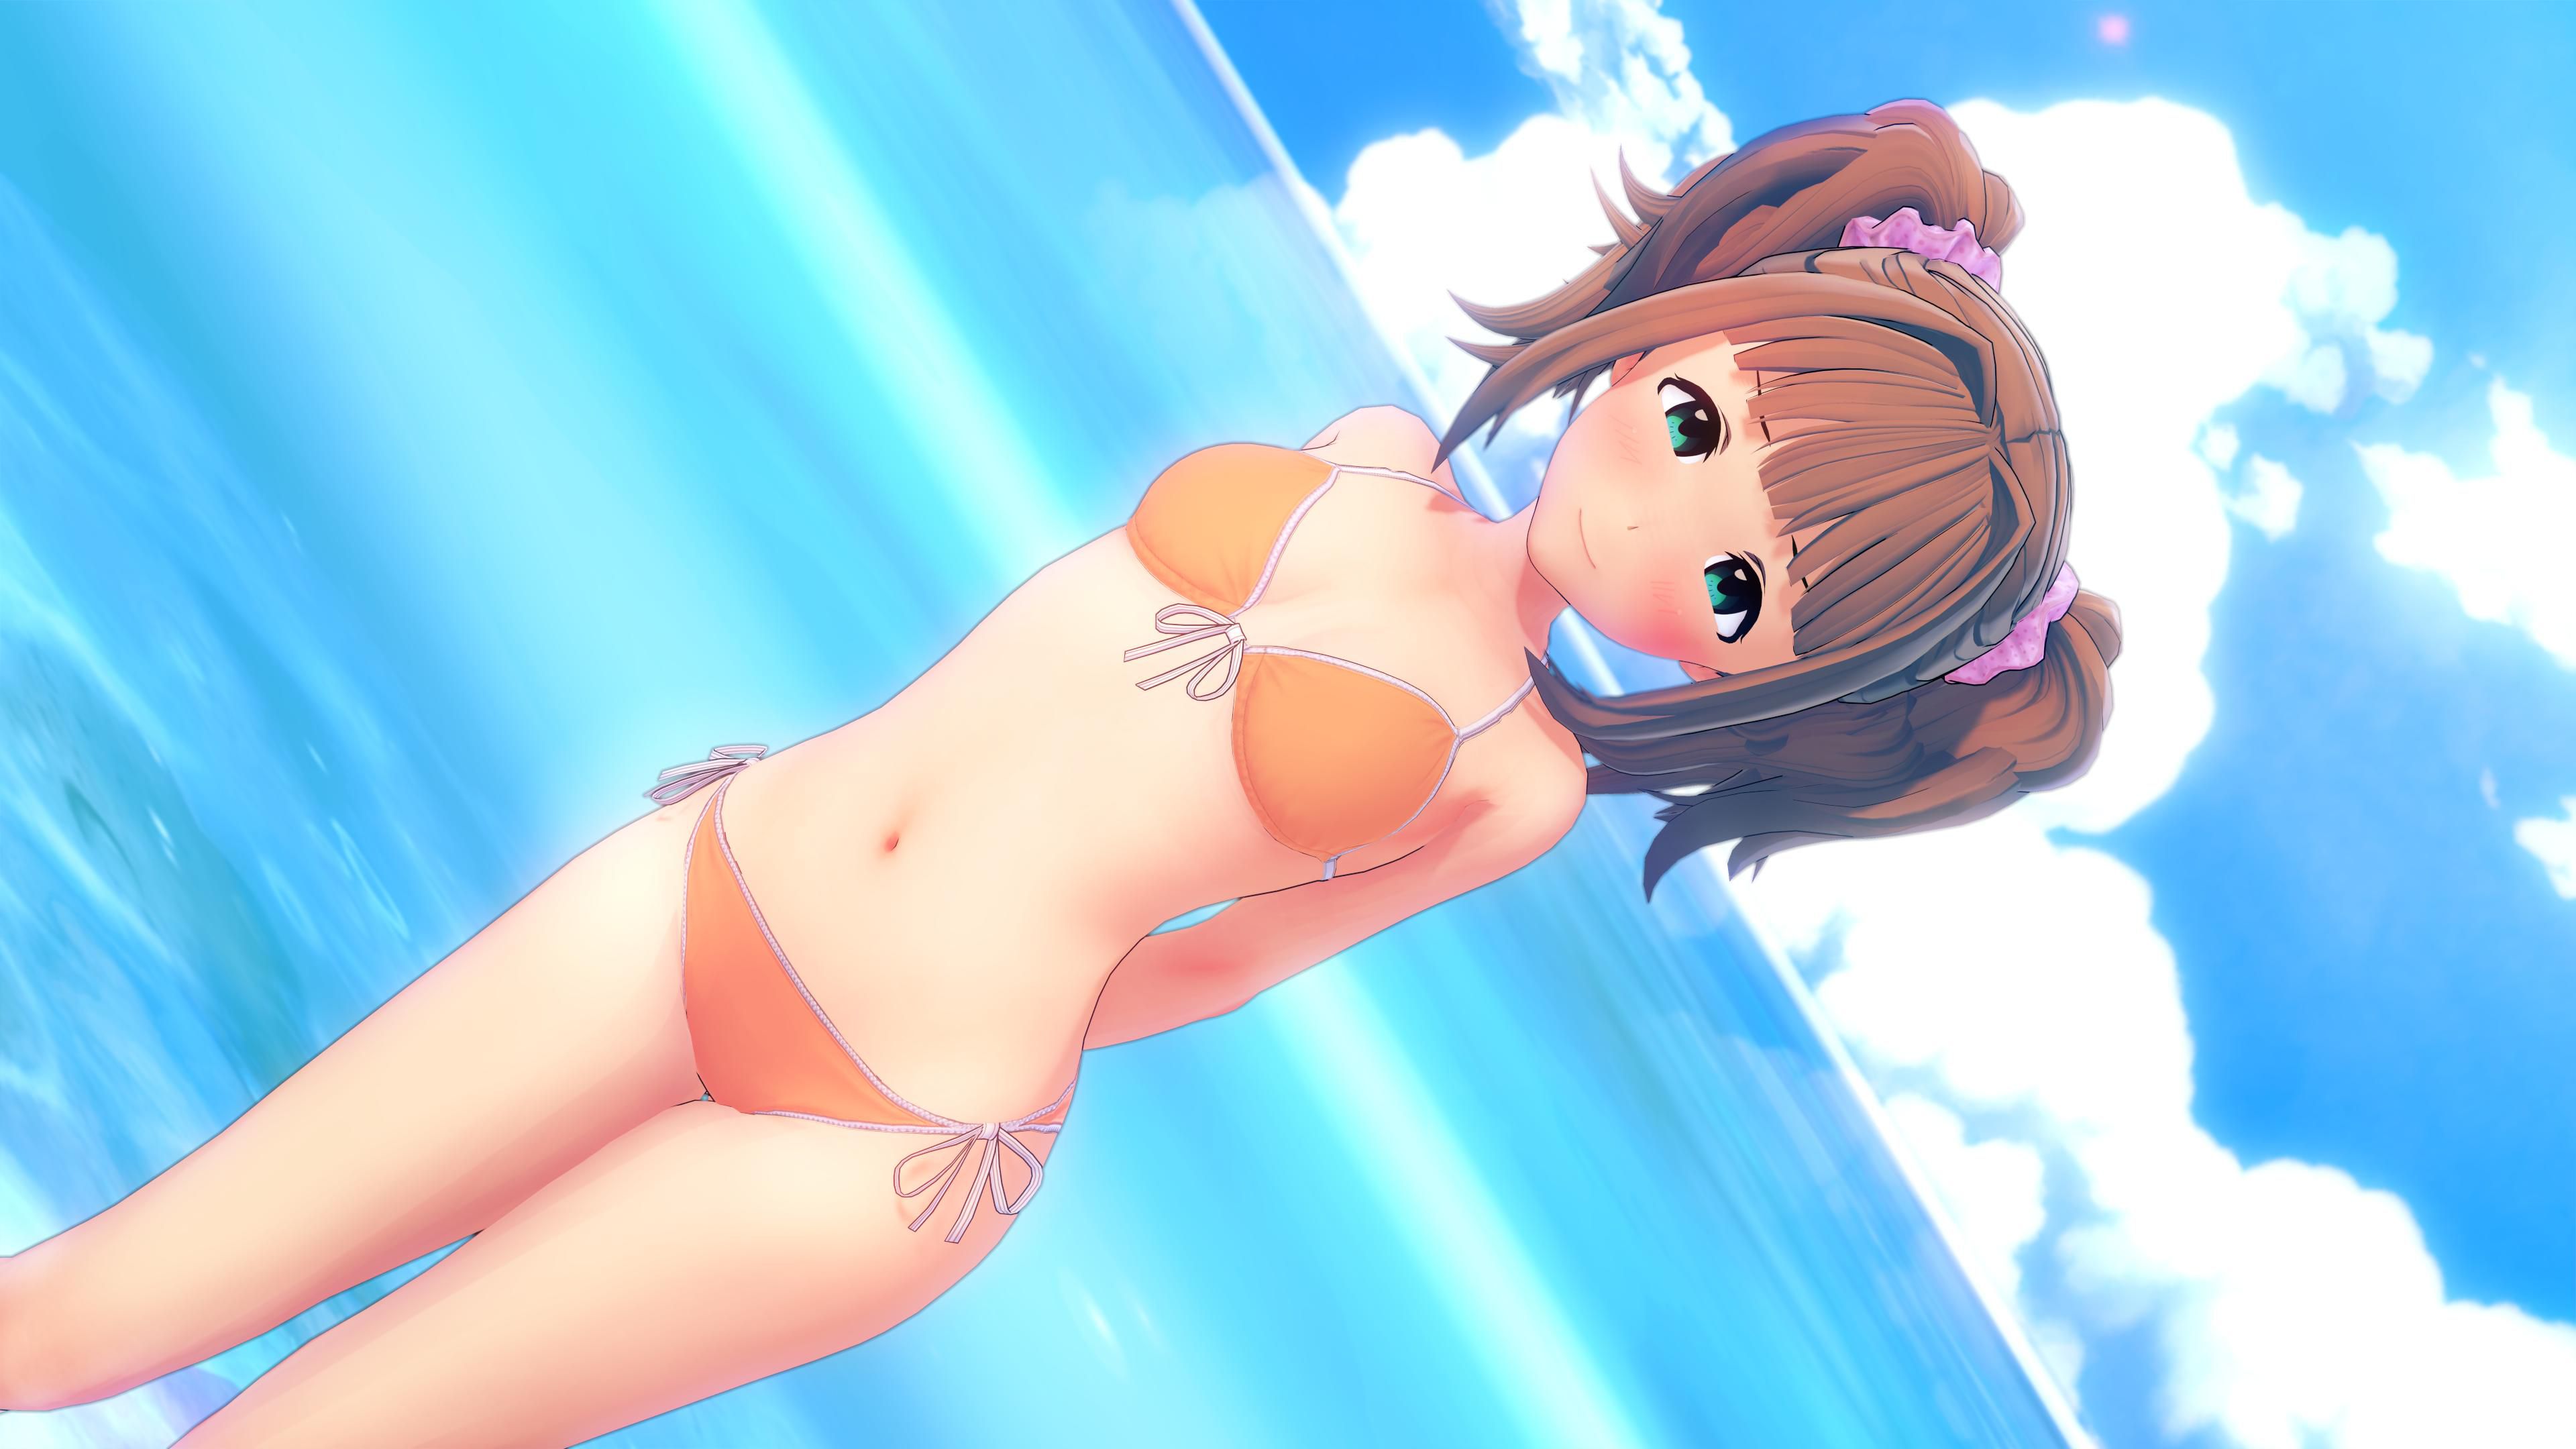 【Image】Eyemouth character made with Eroge is too wwwwww 7